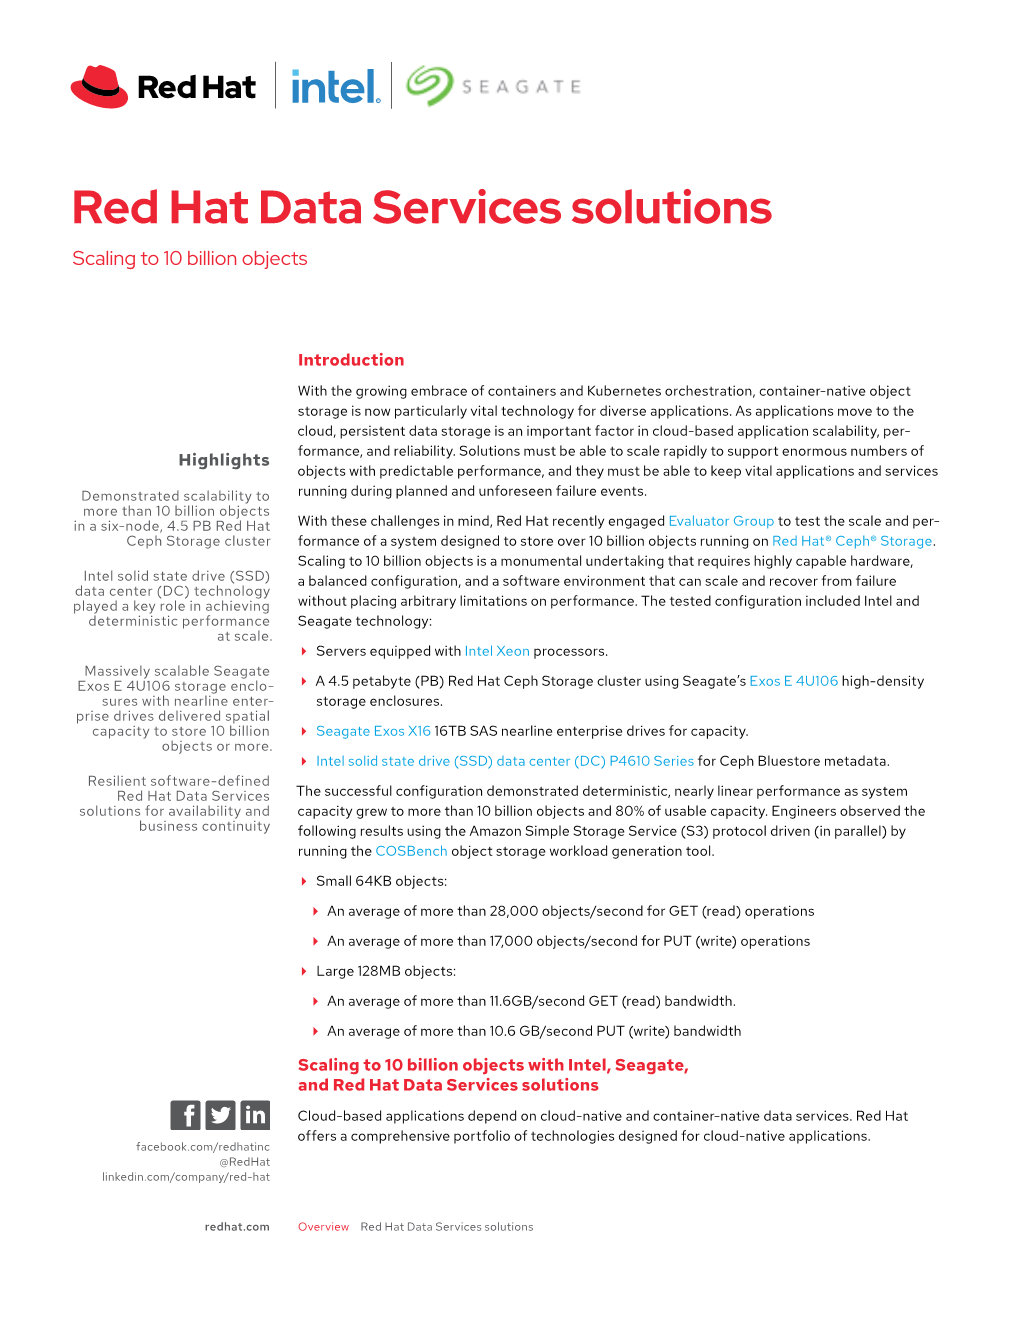 Red Hat Data Services Solutions Scaling to 10 Billion Objects